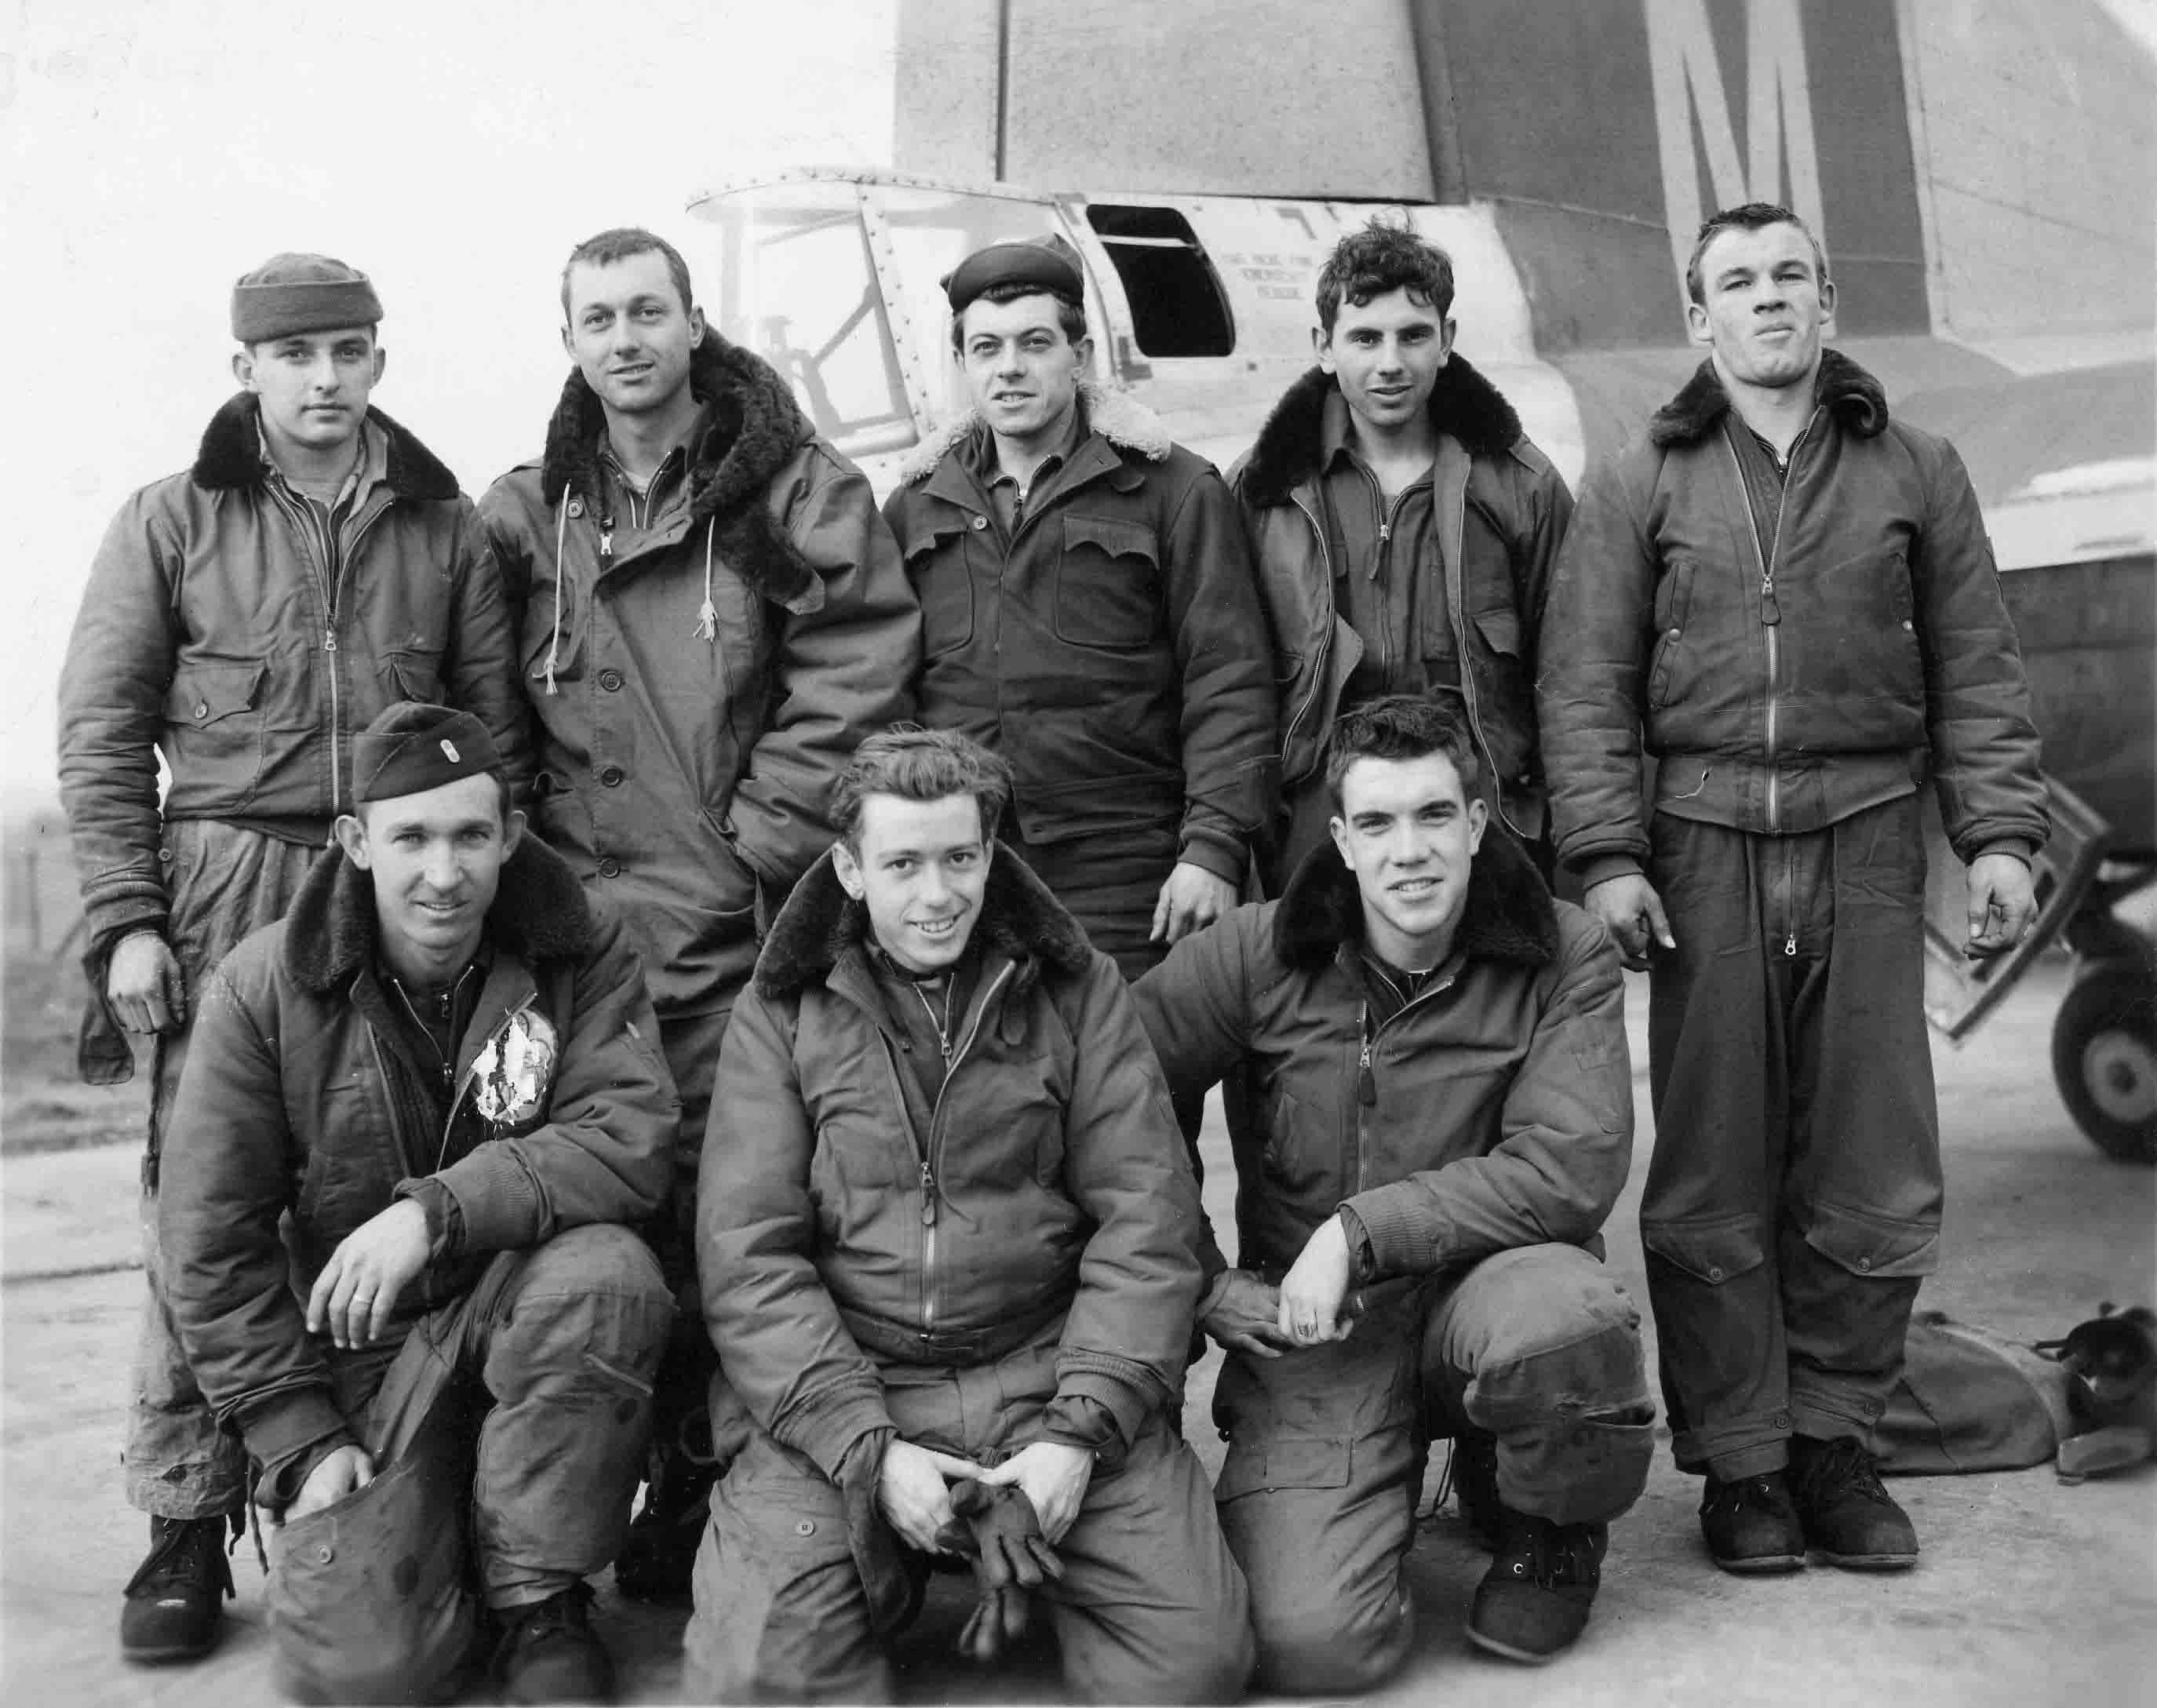 Wintersteen's Crew - 602nd Squadron - March 12, 1945